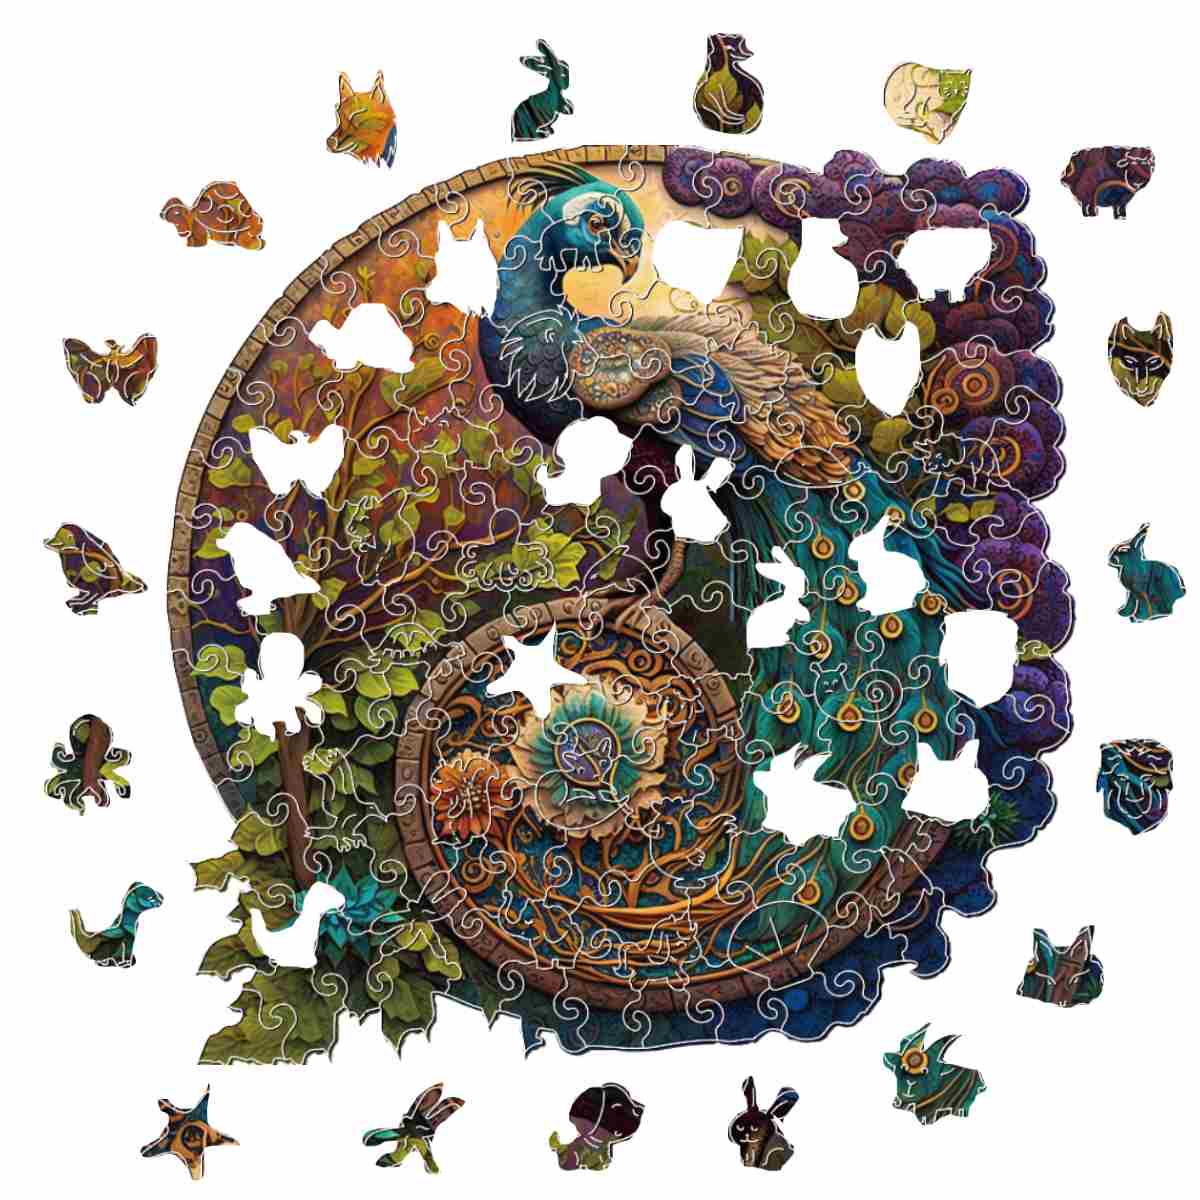 Animal Jigsaw Puzzle > Wooden Jigsaw Puzzle > Jigsaw Puzzle Peacock Yin Yang - Jigsaw Puzzle